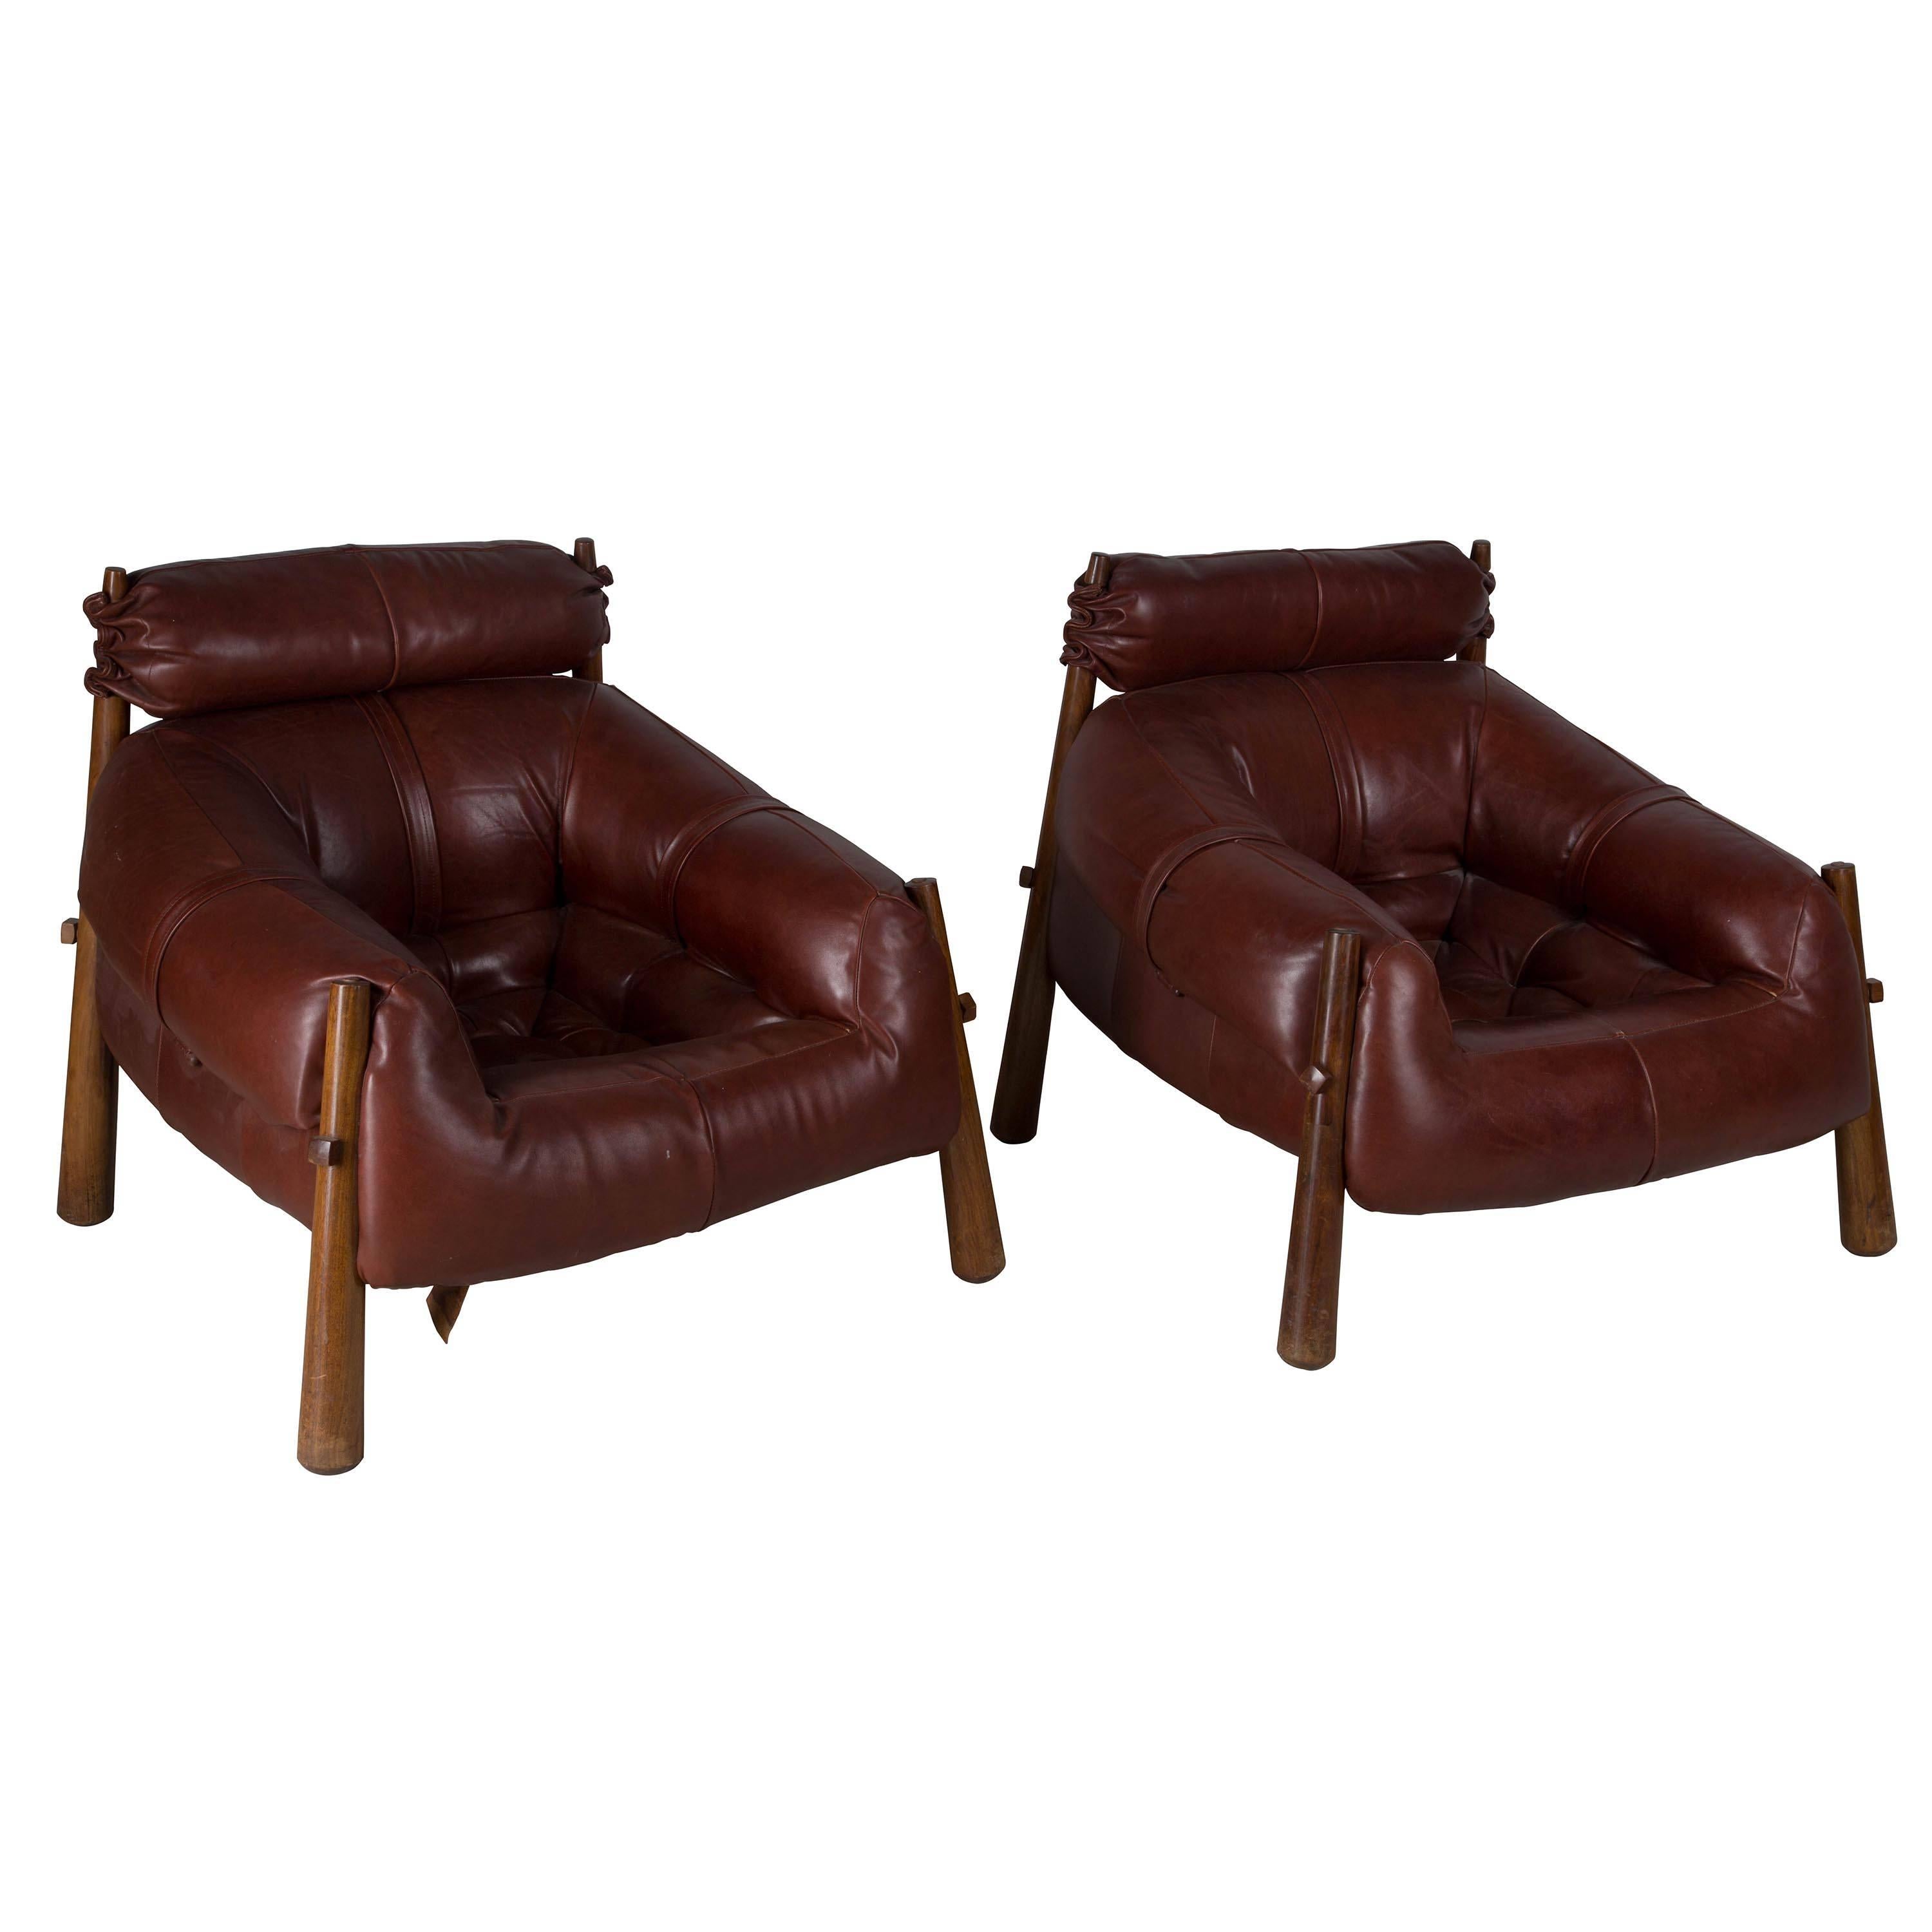 A pair of 1950s Brazilian leather armchairs.